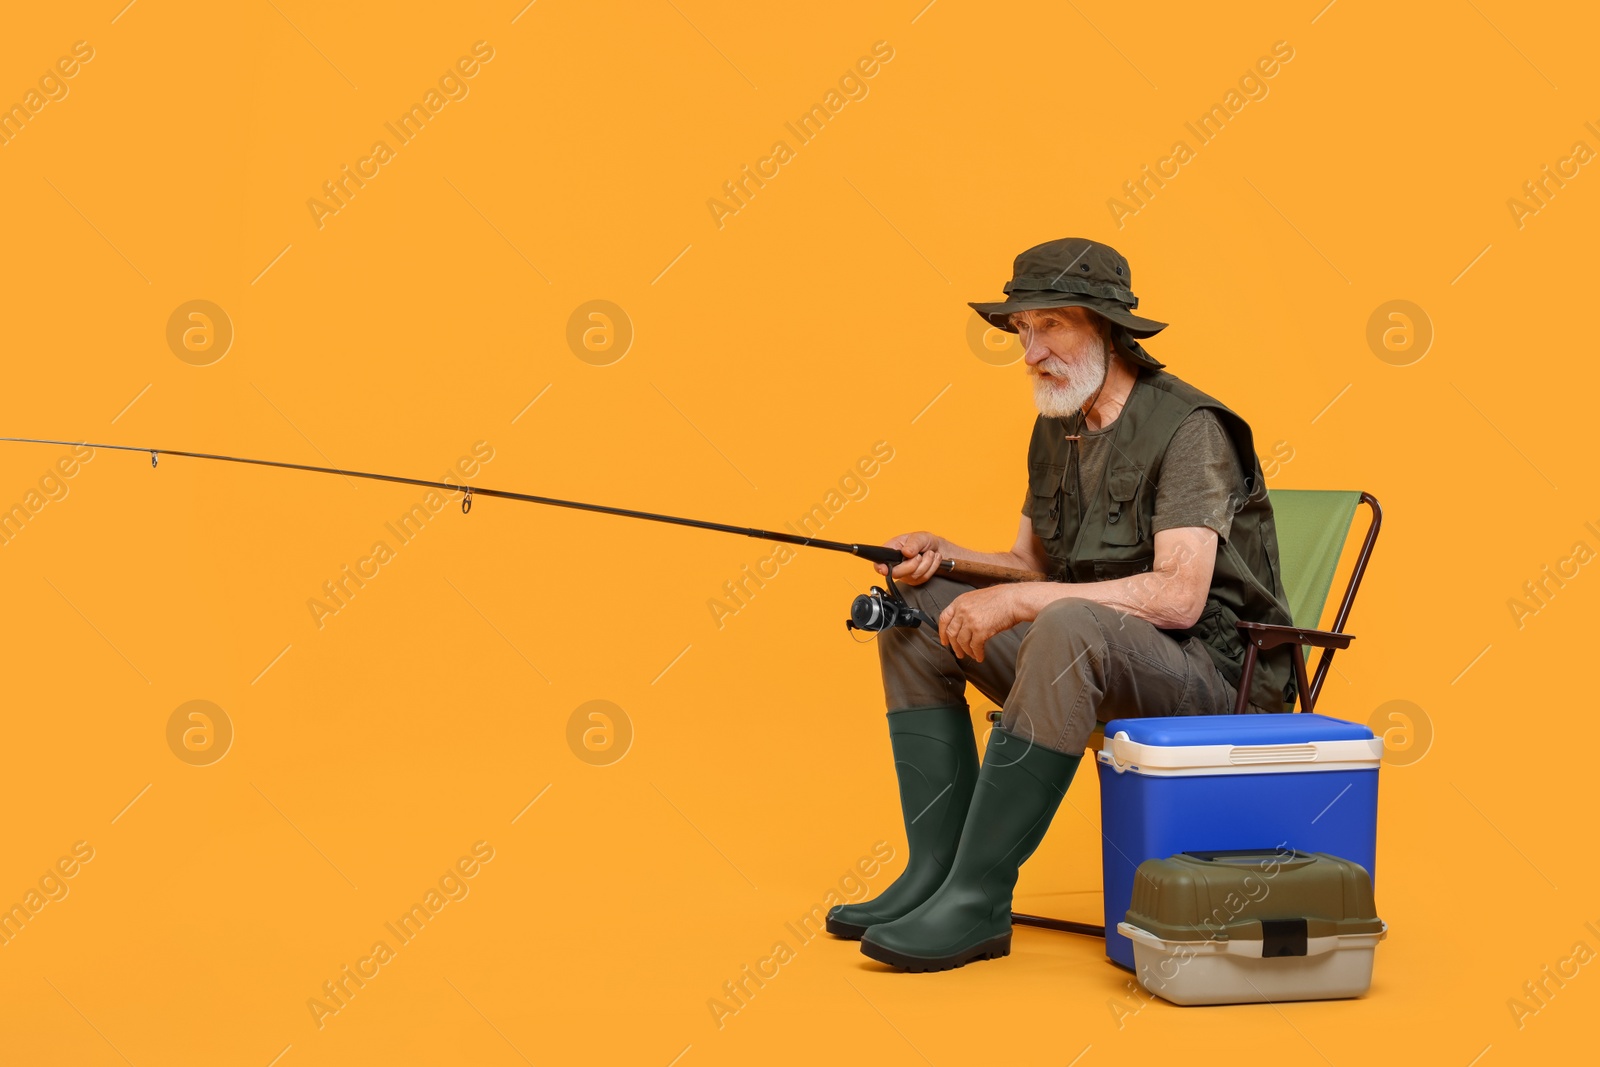 Photo of Fisherman with fishing rod on chair against yellow background